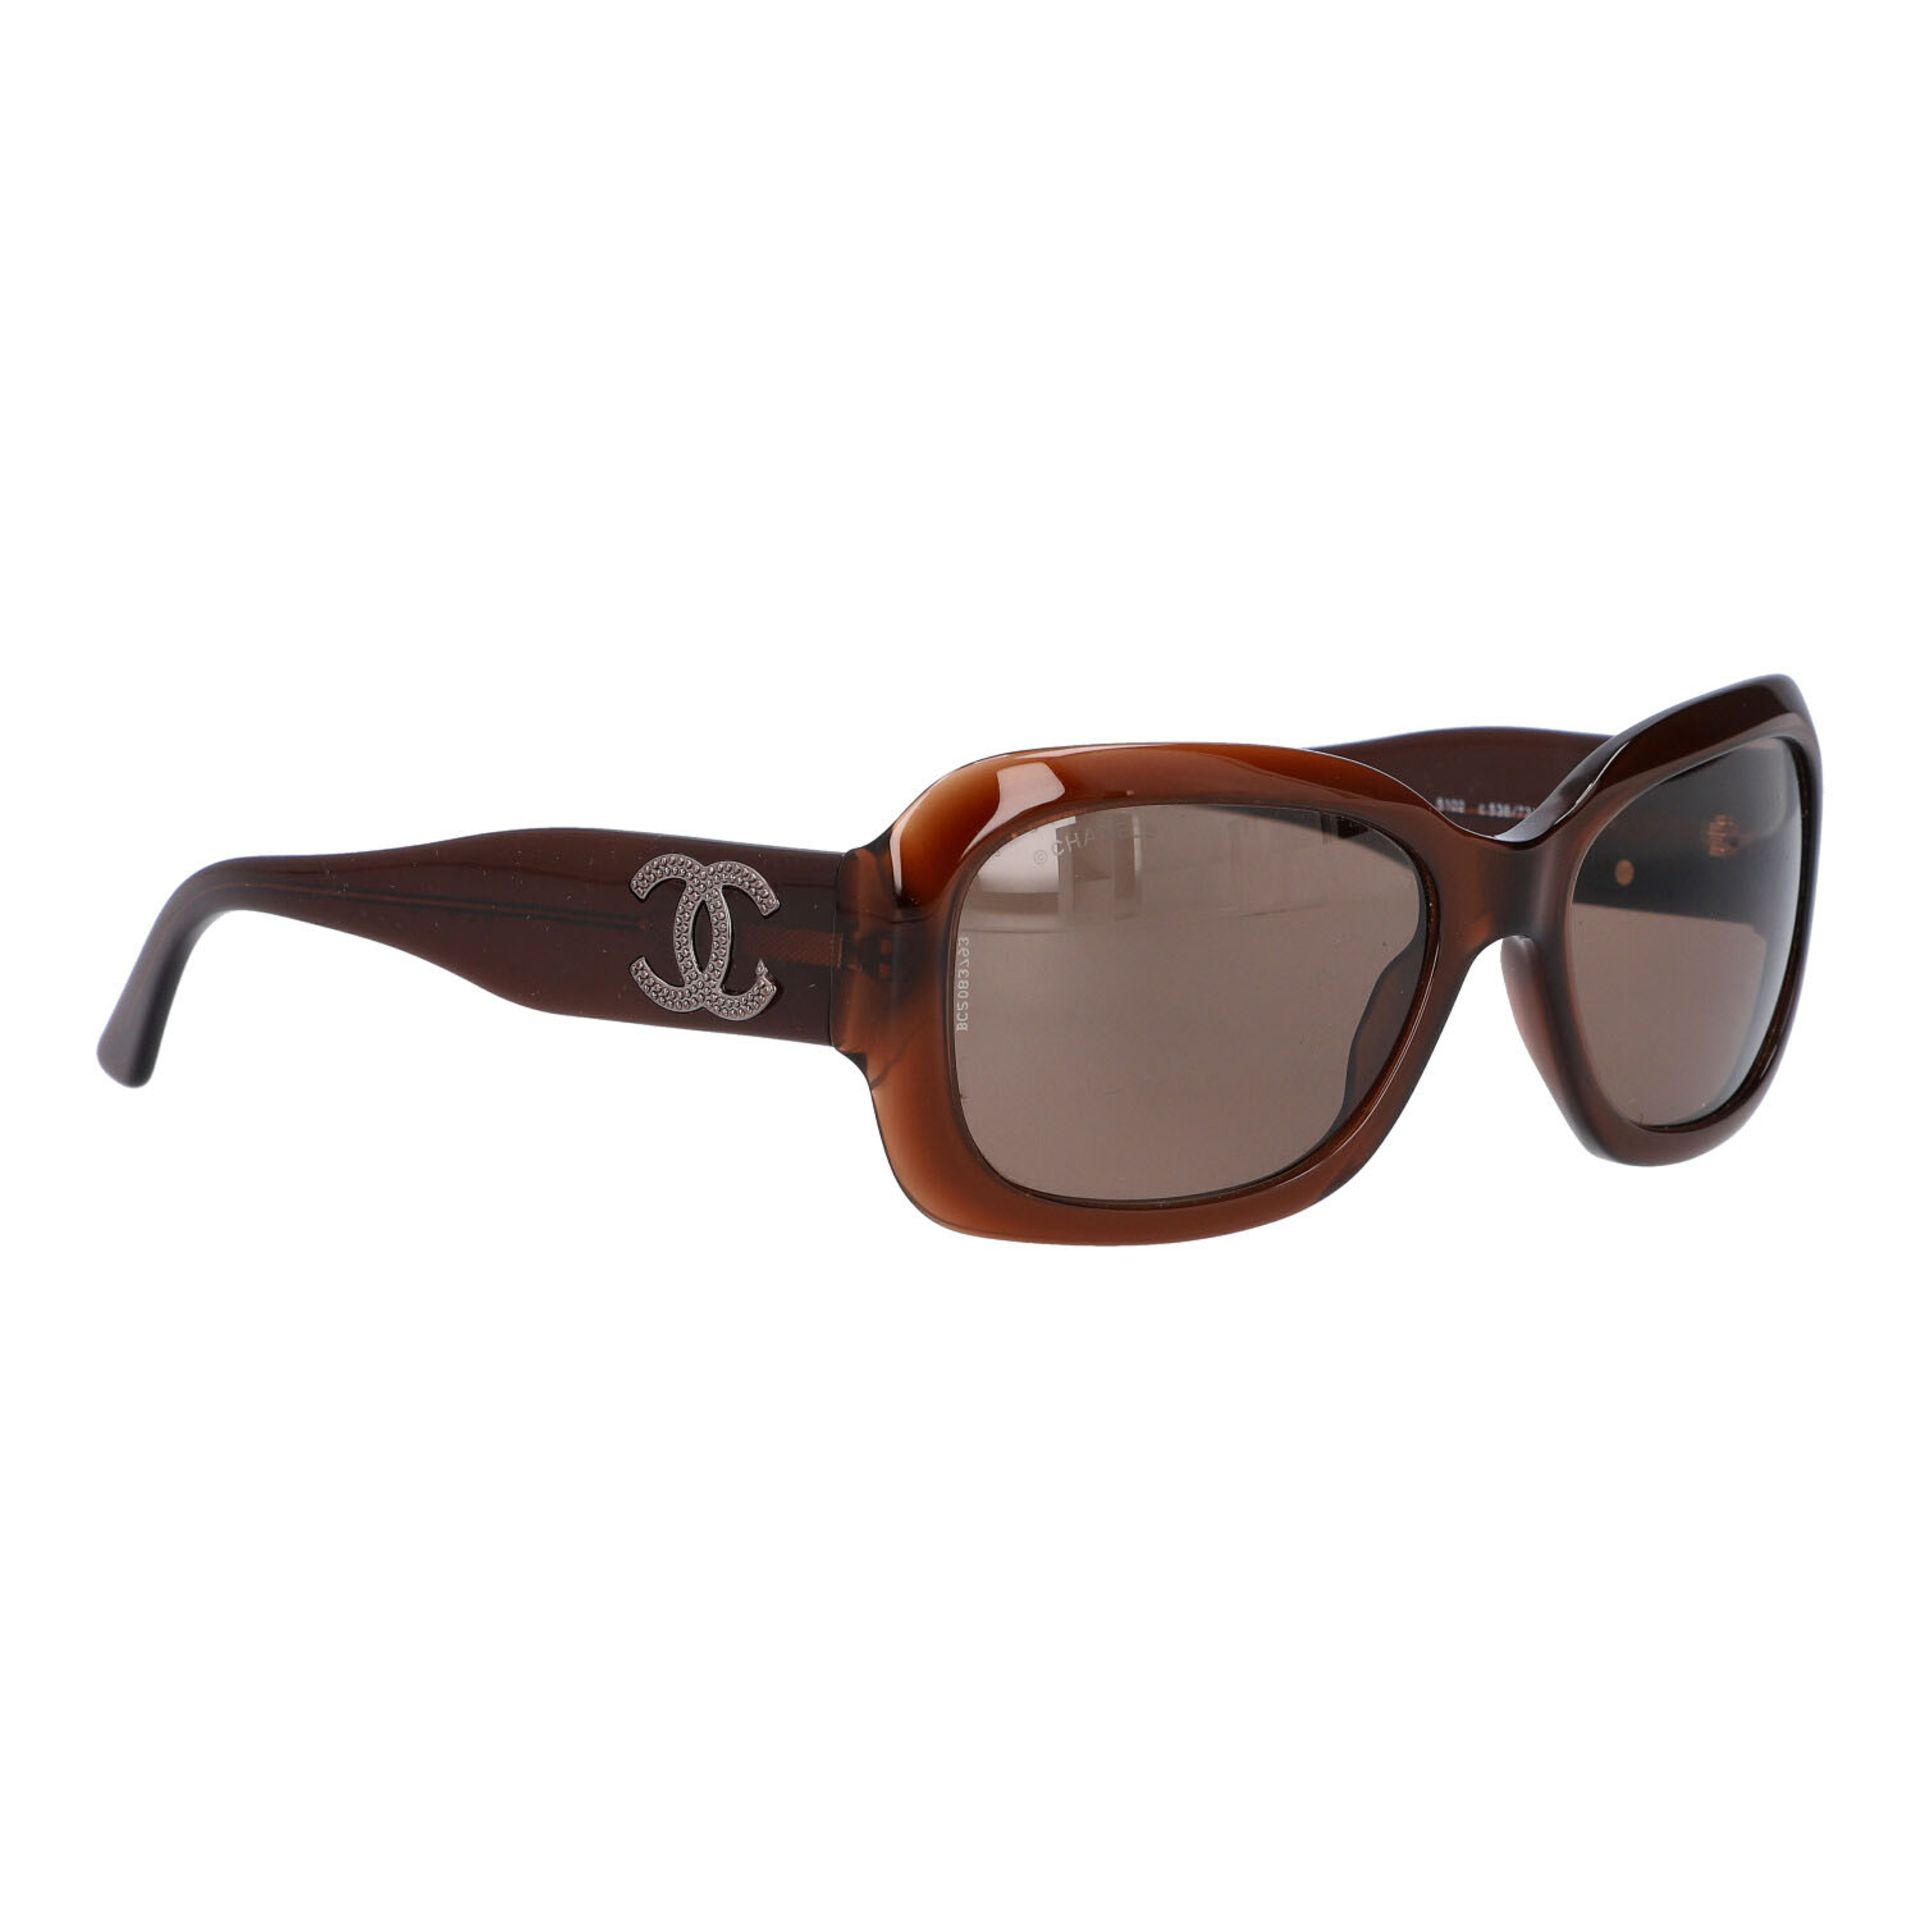 CHANEL Sonnenbrille "c.538/73". - Image 2 of 4